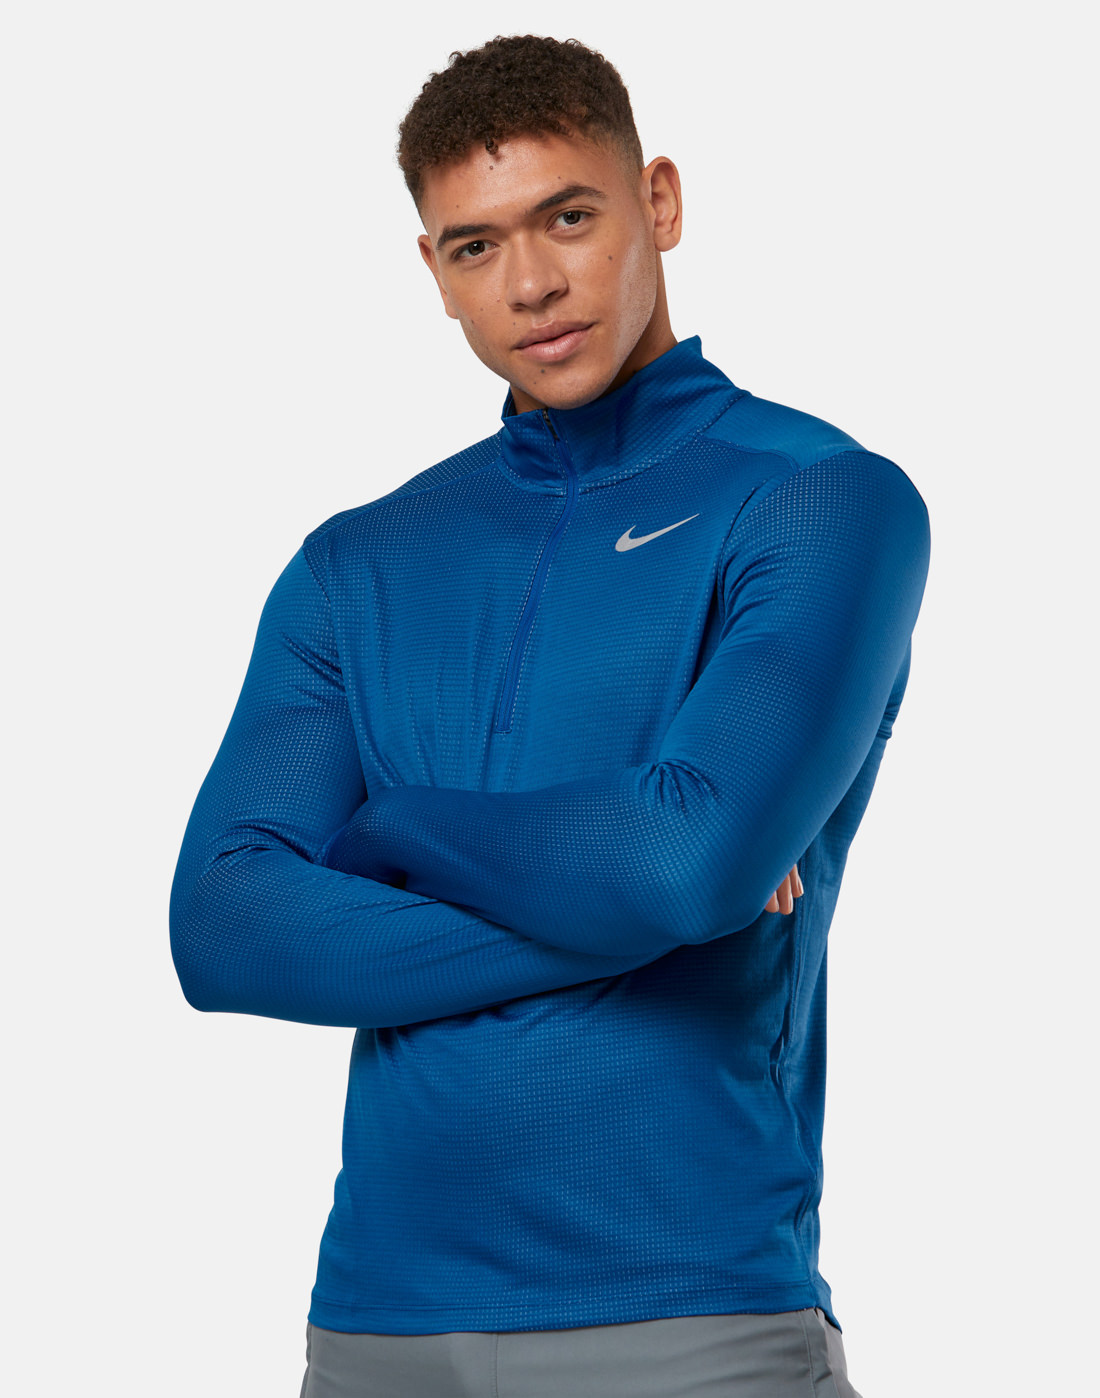 Nike Mens Pacer Half Zip Top - Blue | Life Style Sports UK